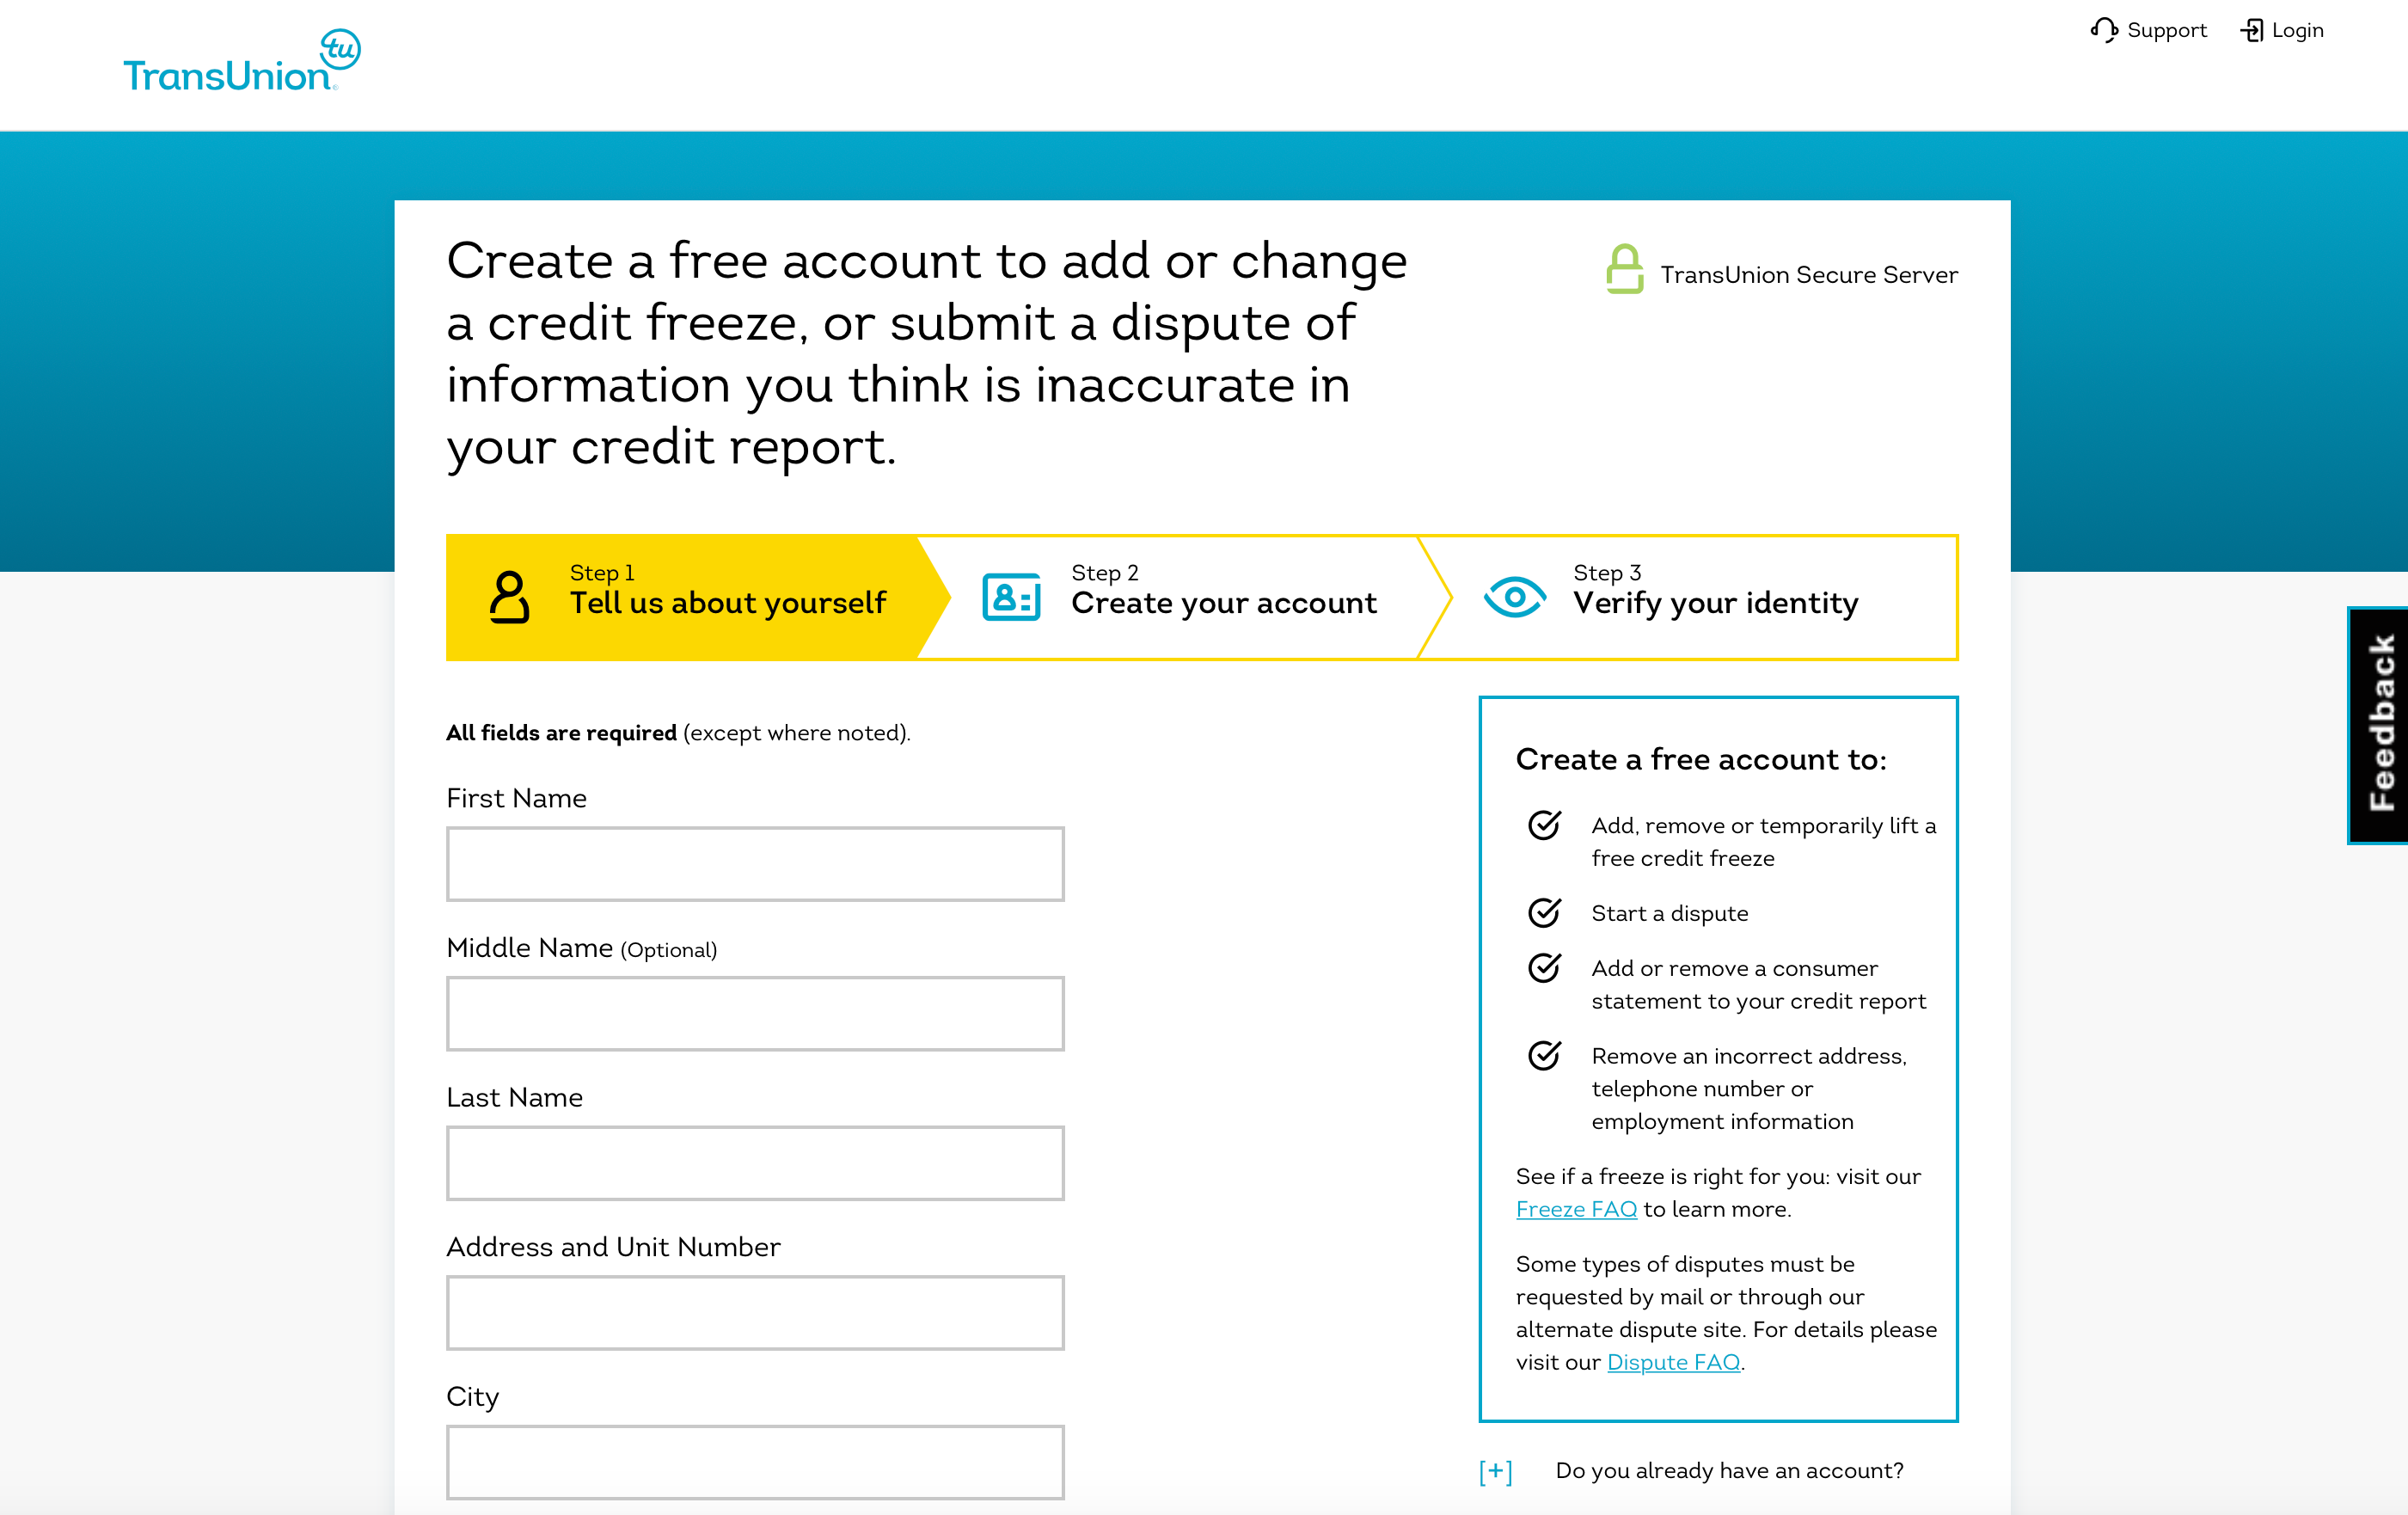 transunion credit freeze fee pay by check